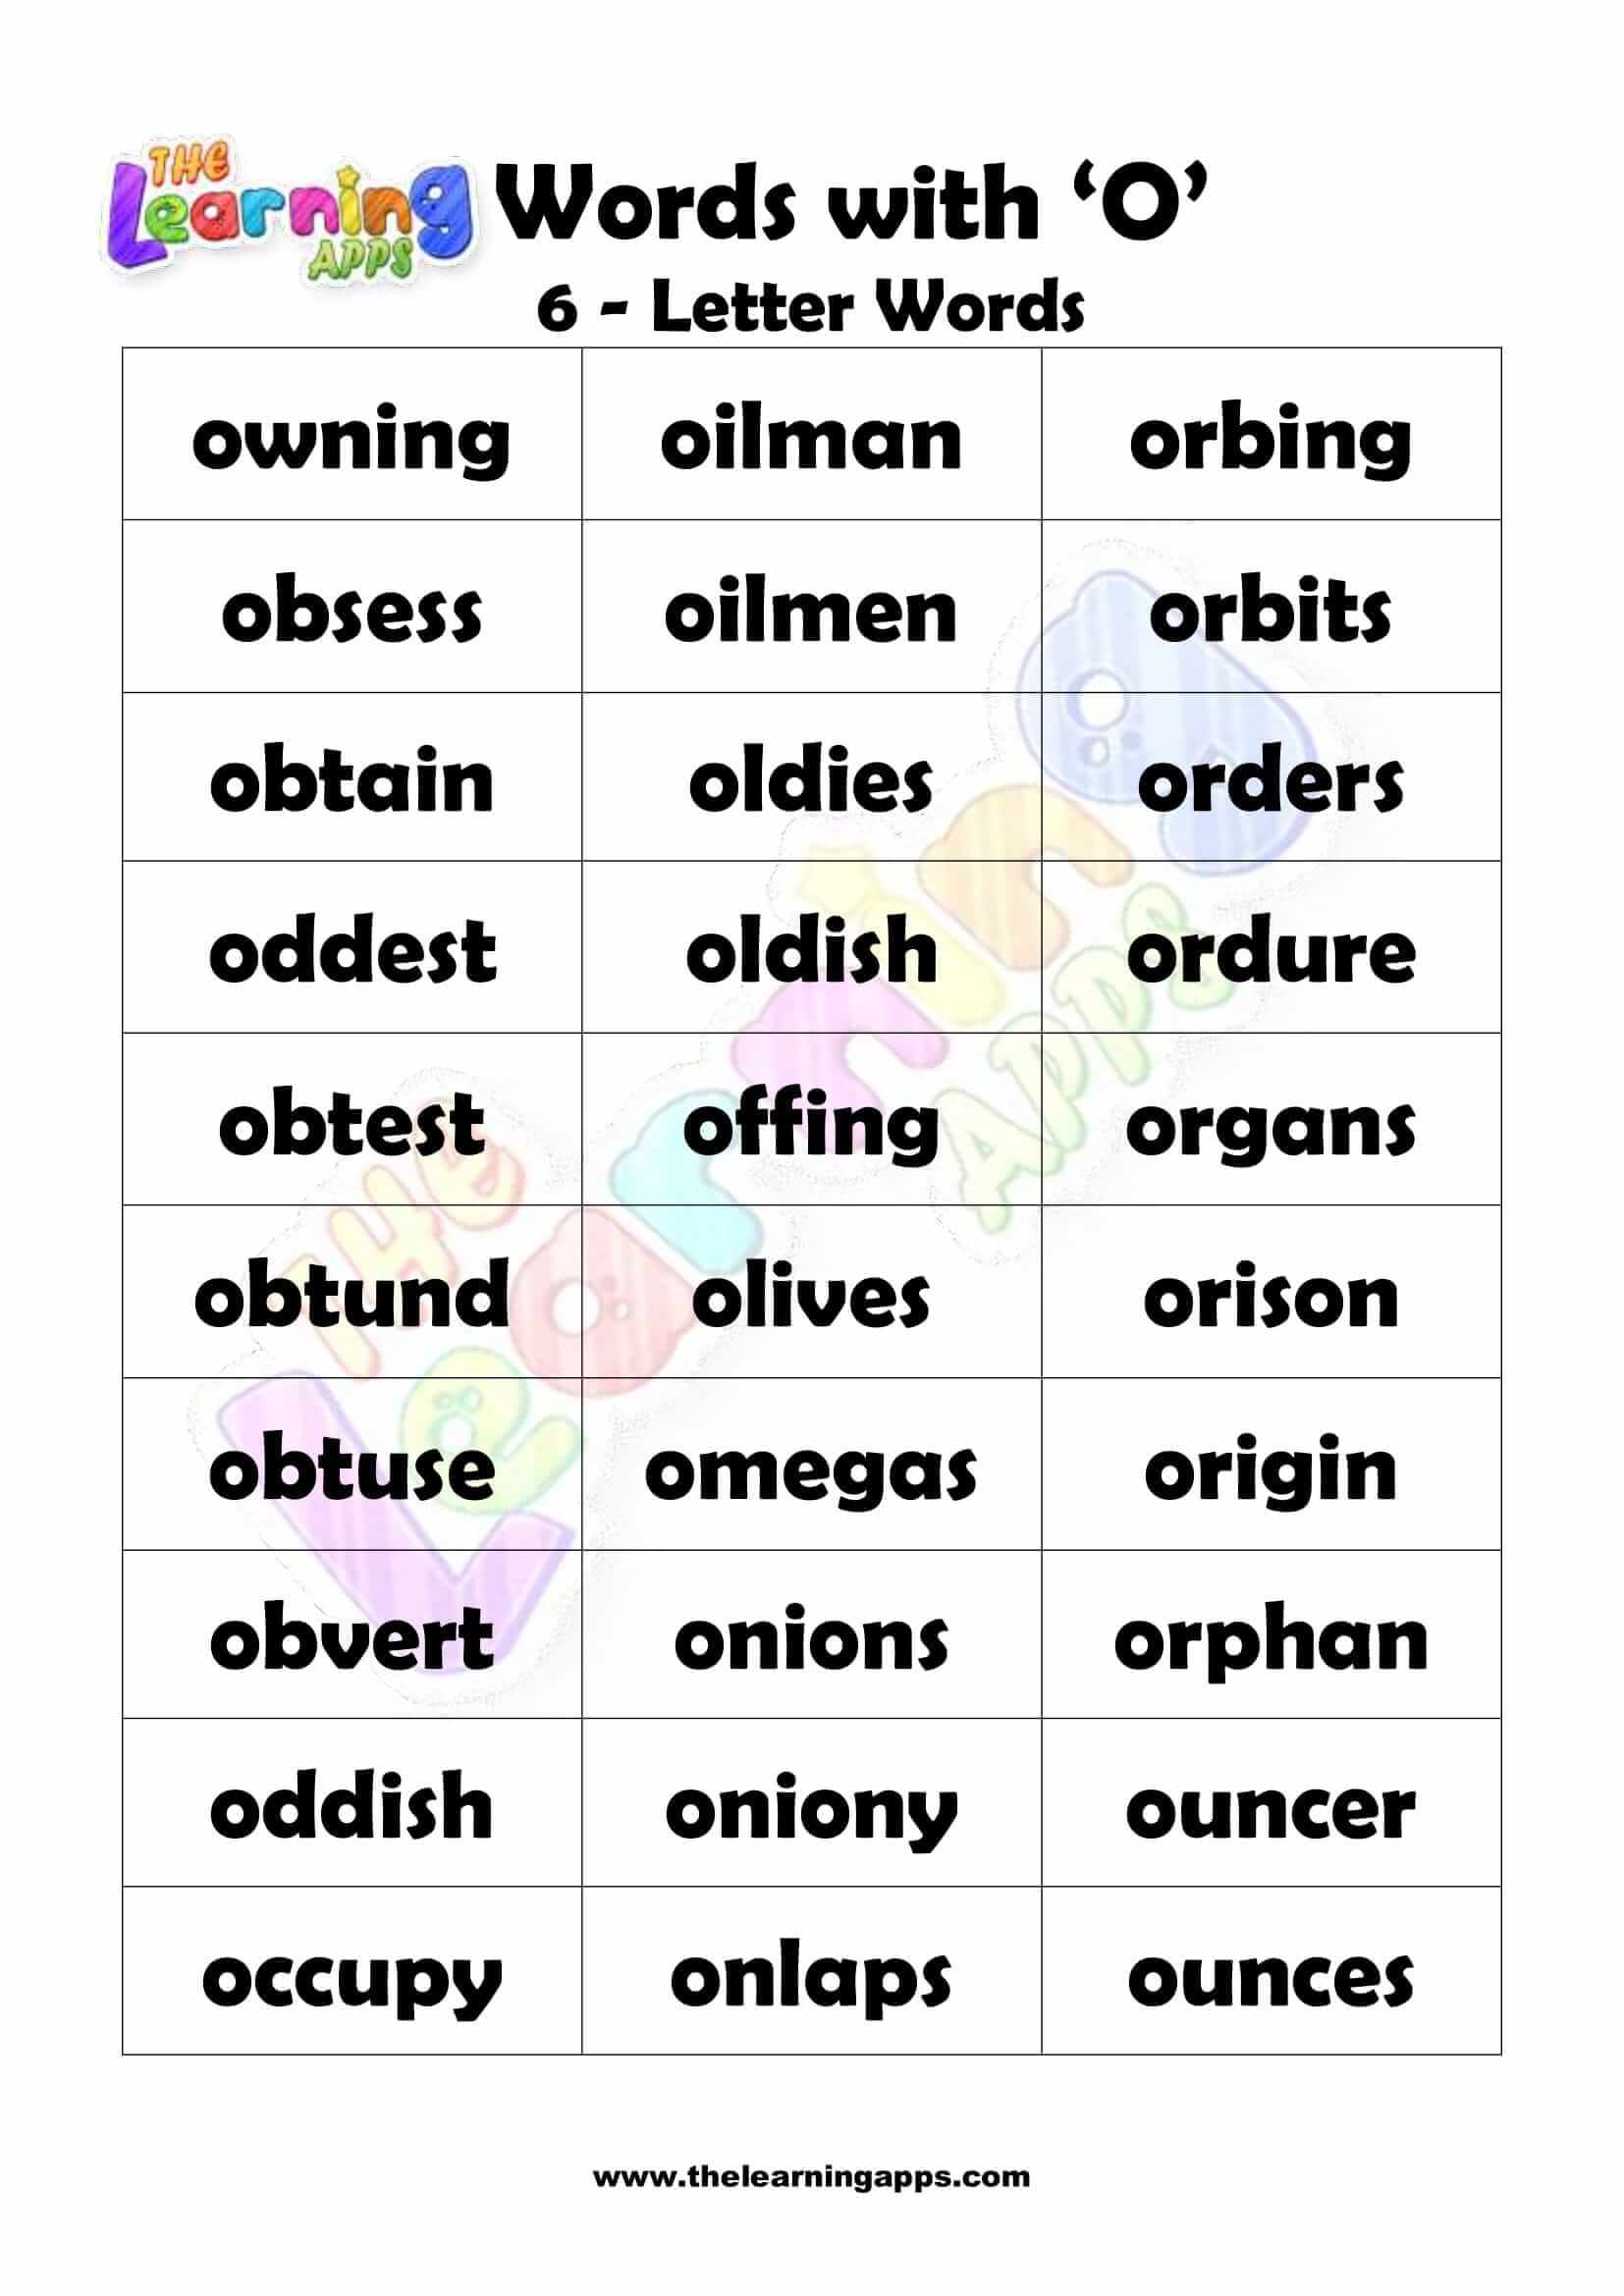 6 LETTER WORD STARTING WITH O-2